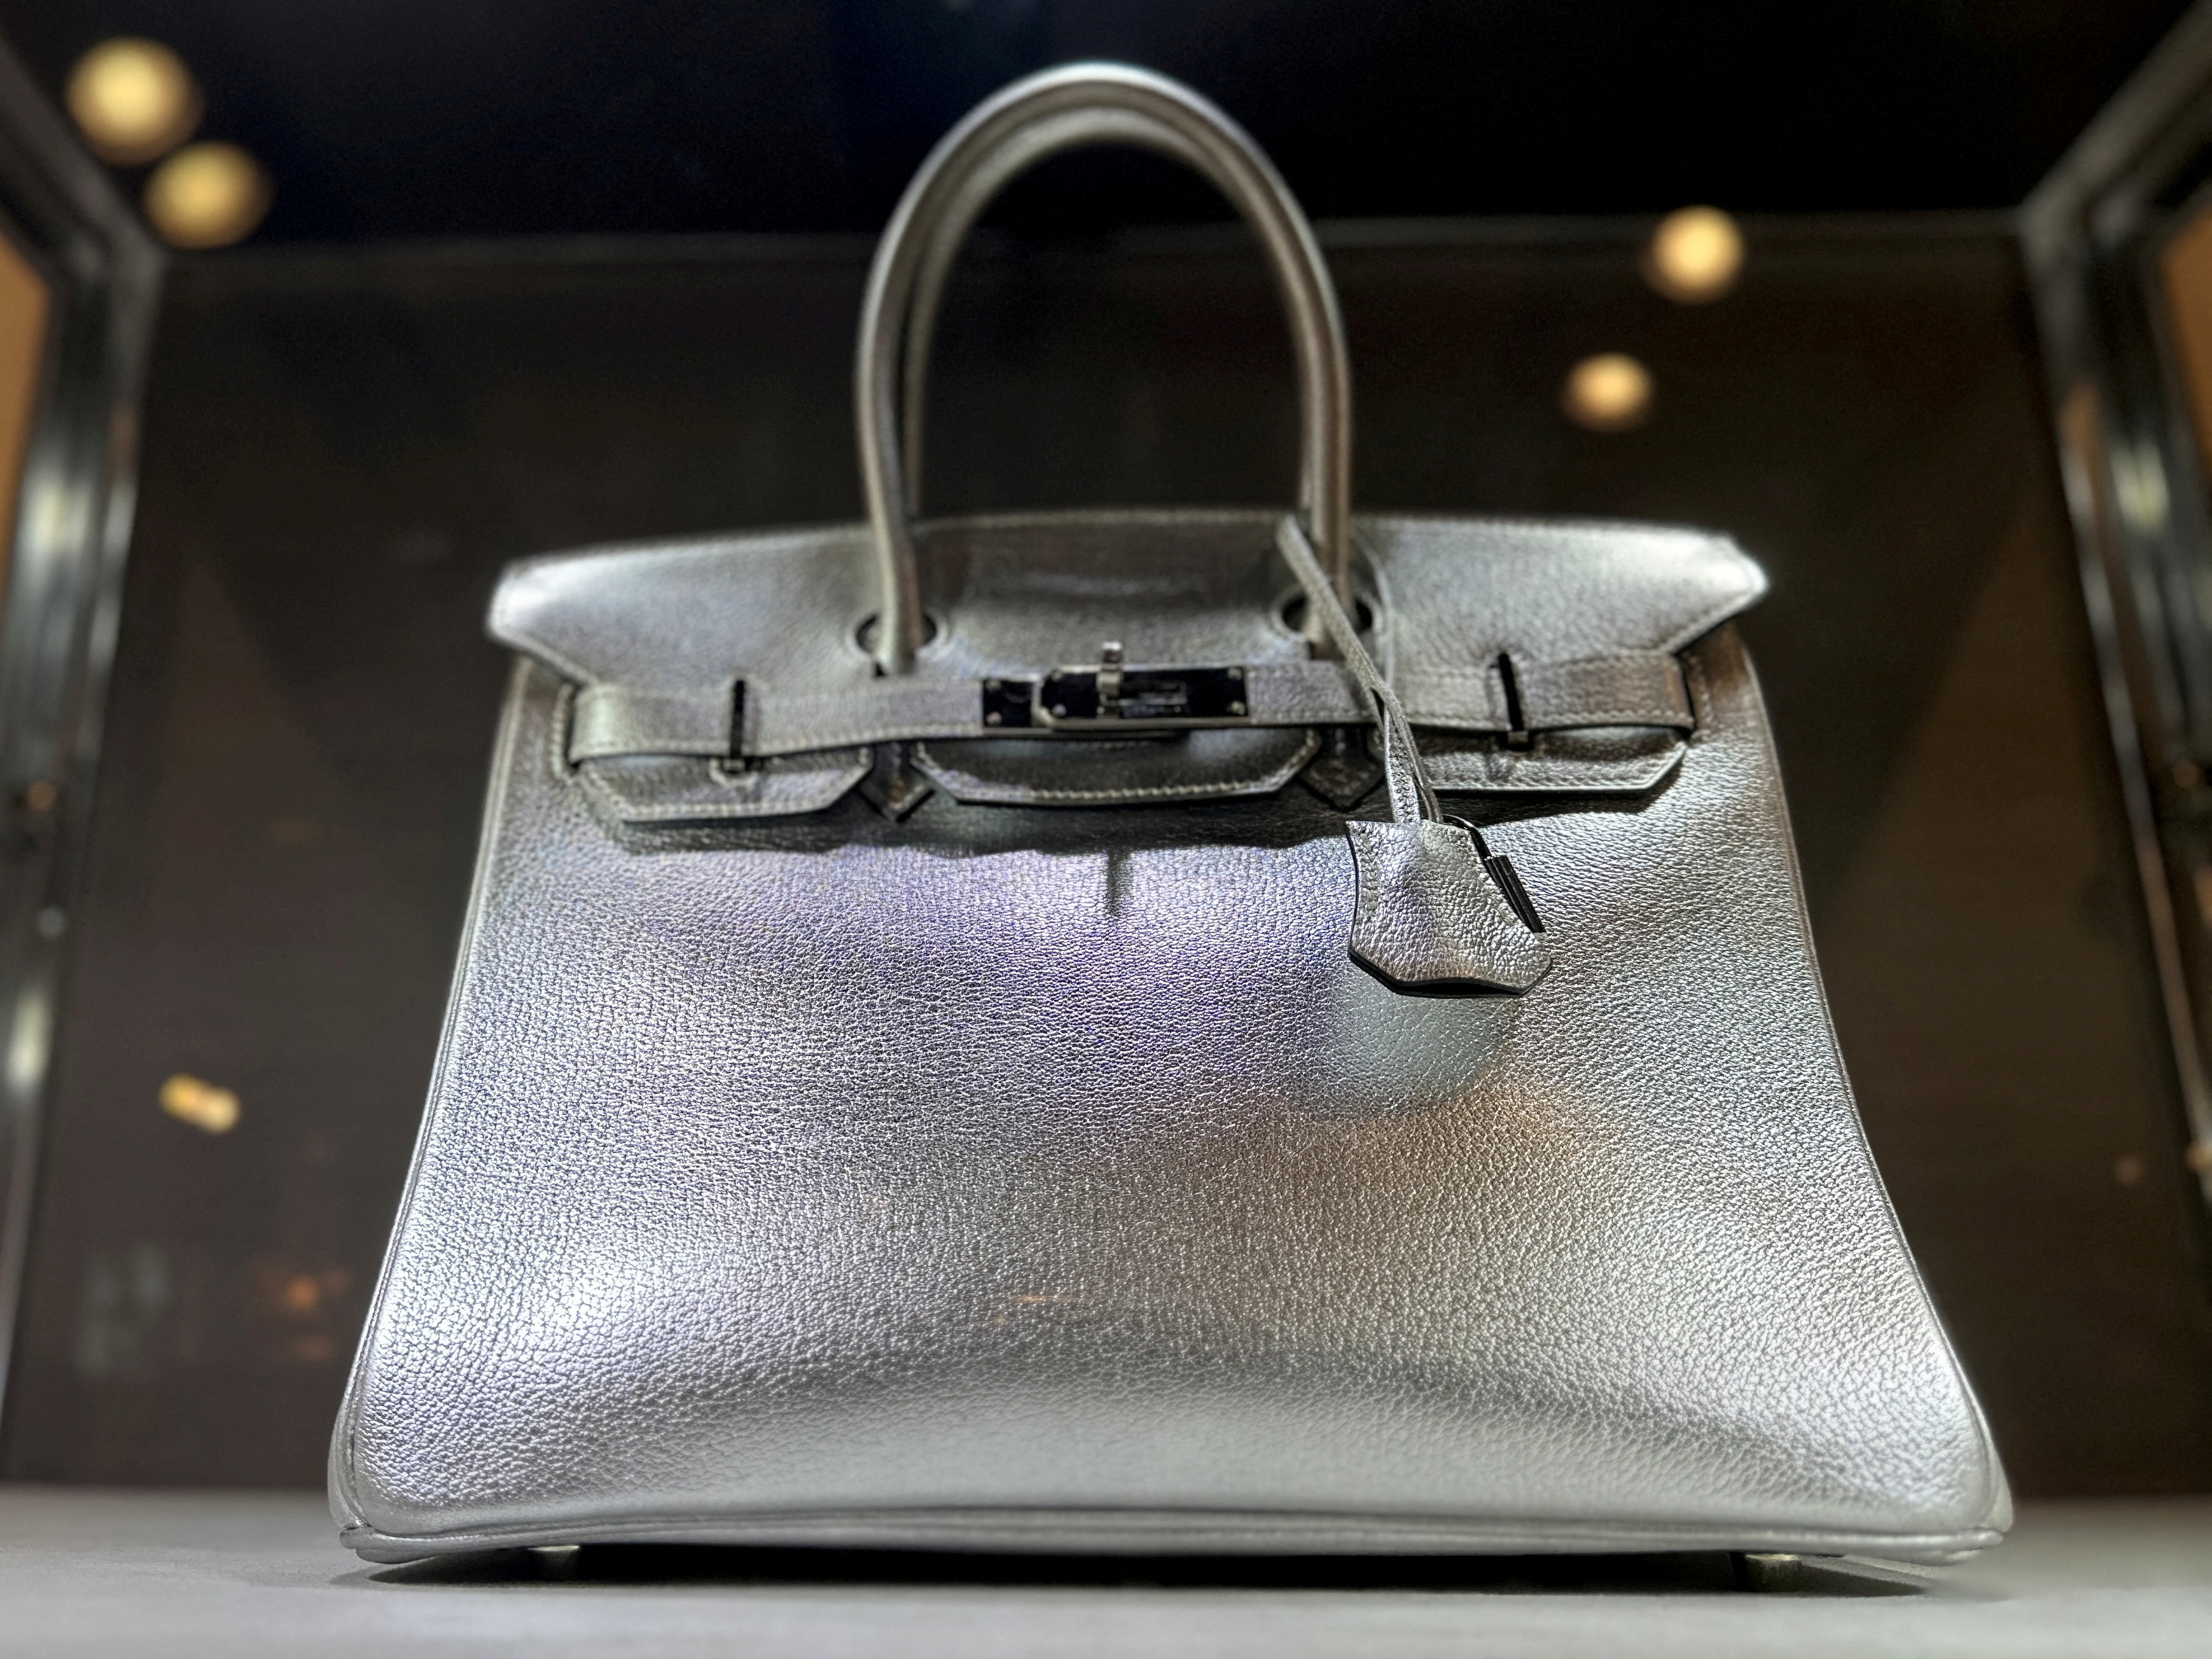 Luxury handbags up for auction at Sotheby's, NYC